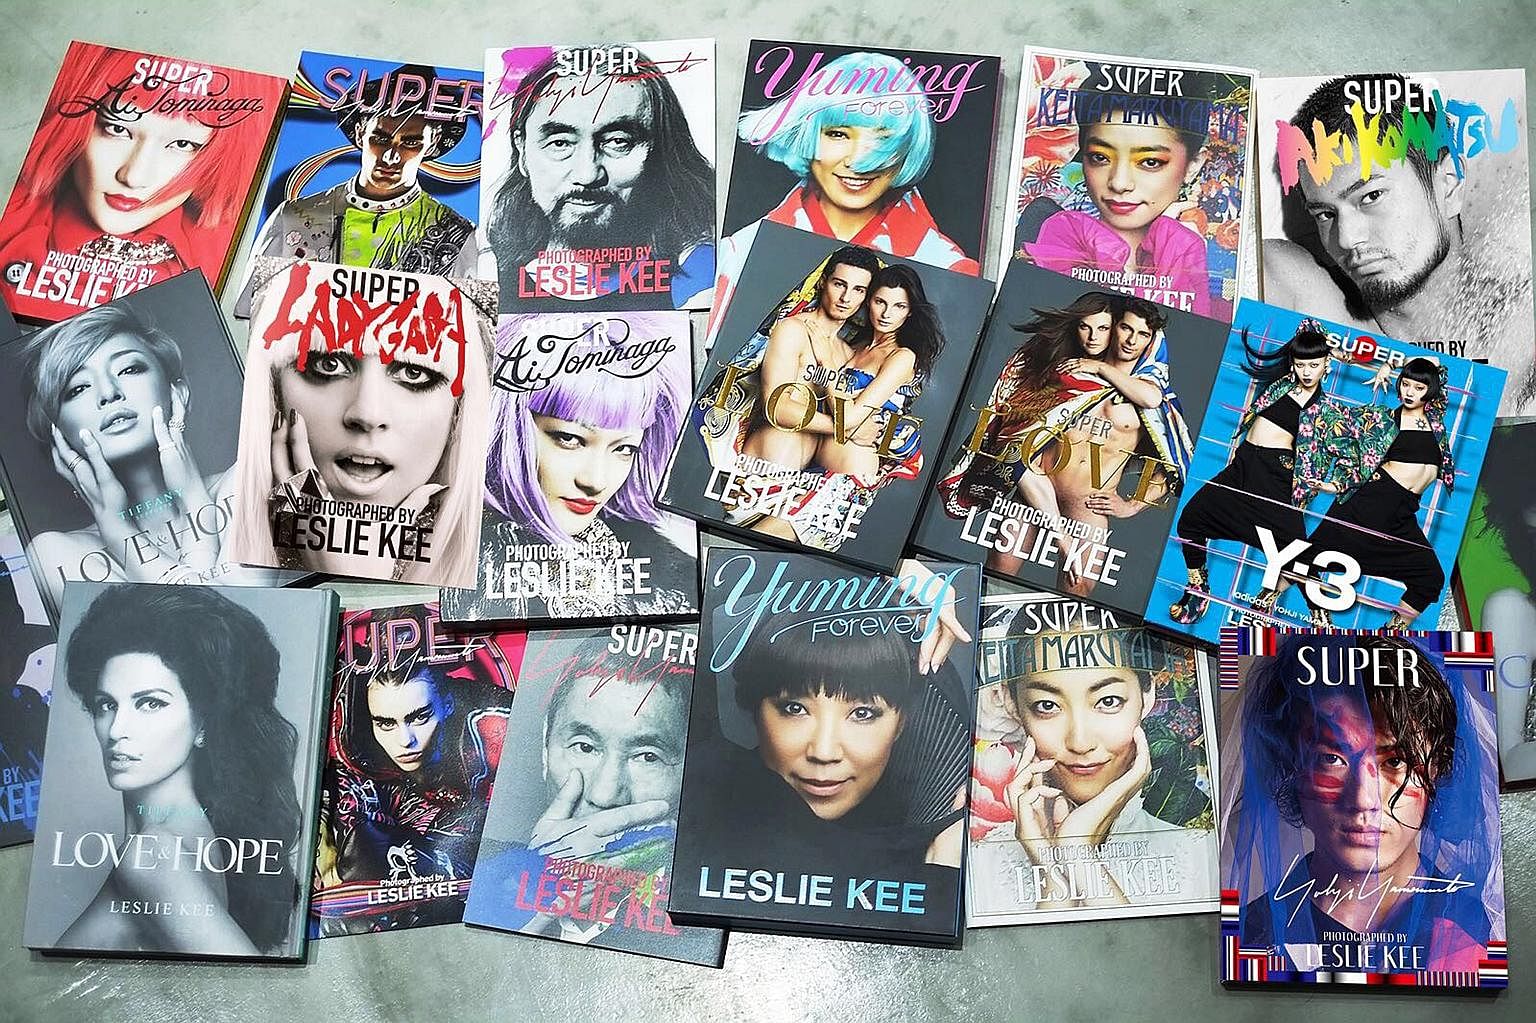 Kee has published nearly 100 issues of his Super magazine since 2003. These are collaborative coffee-table books with famous art directors.